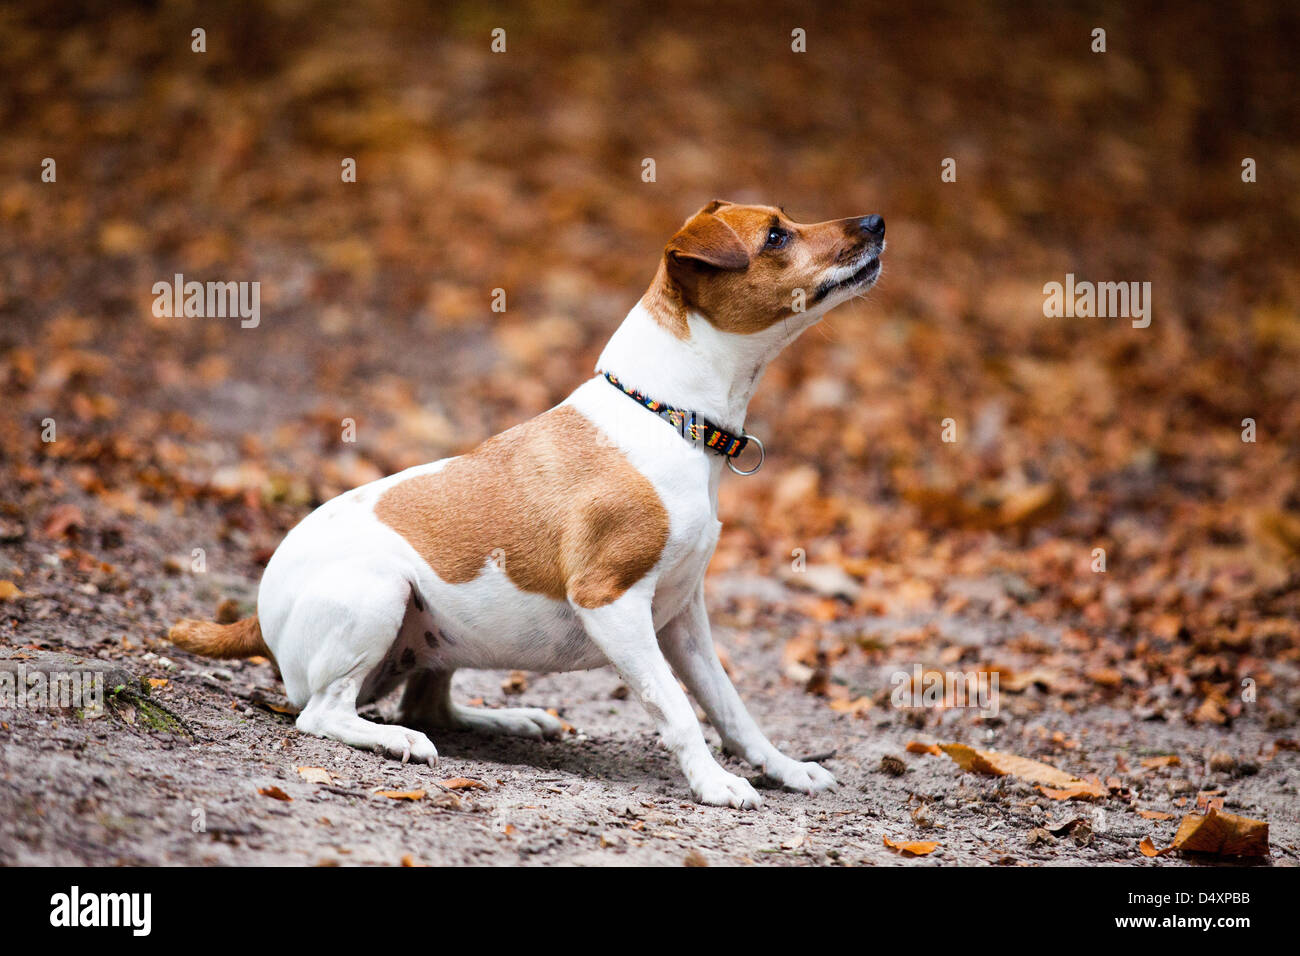 Brown & White Jack Russell Terrier in the Autumn/ Fall leaves - a woodland scene Stock Photo